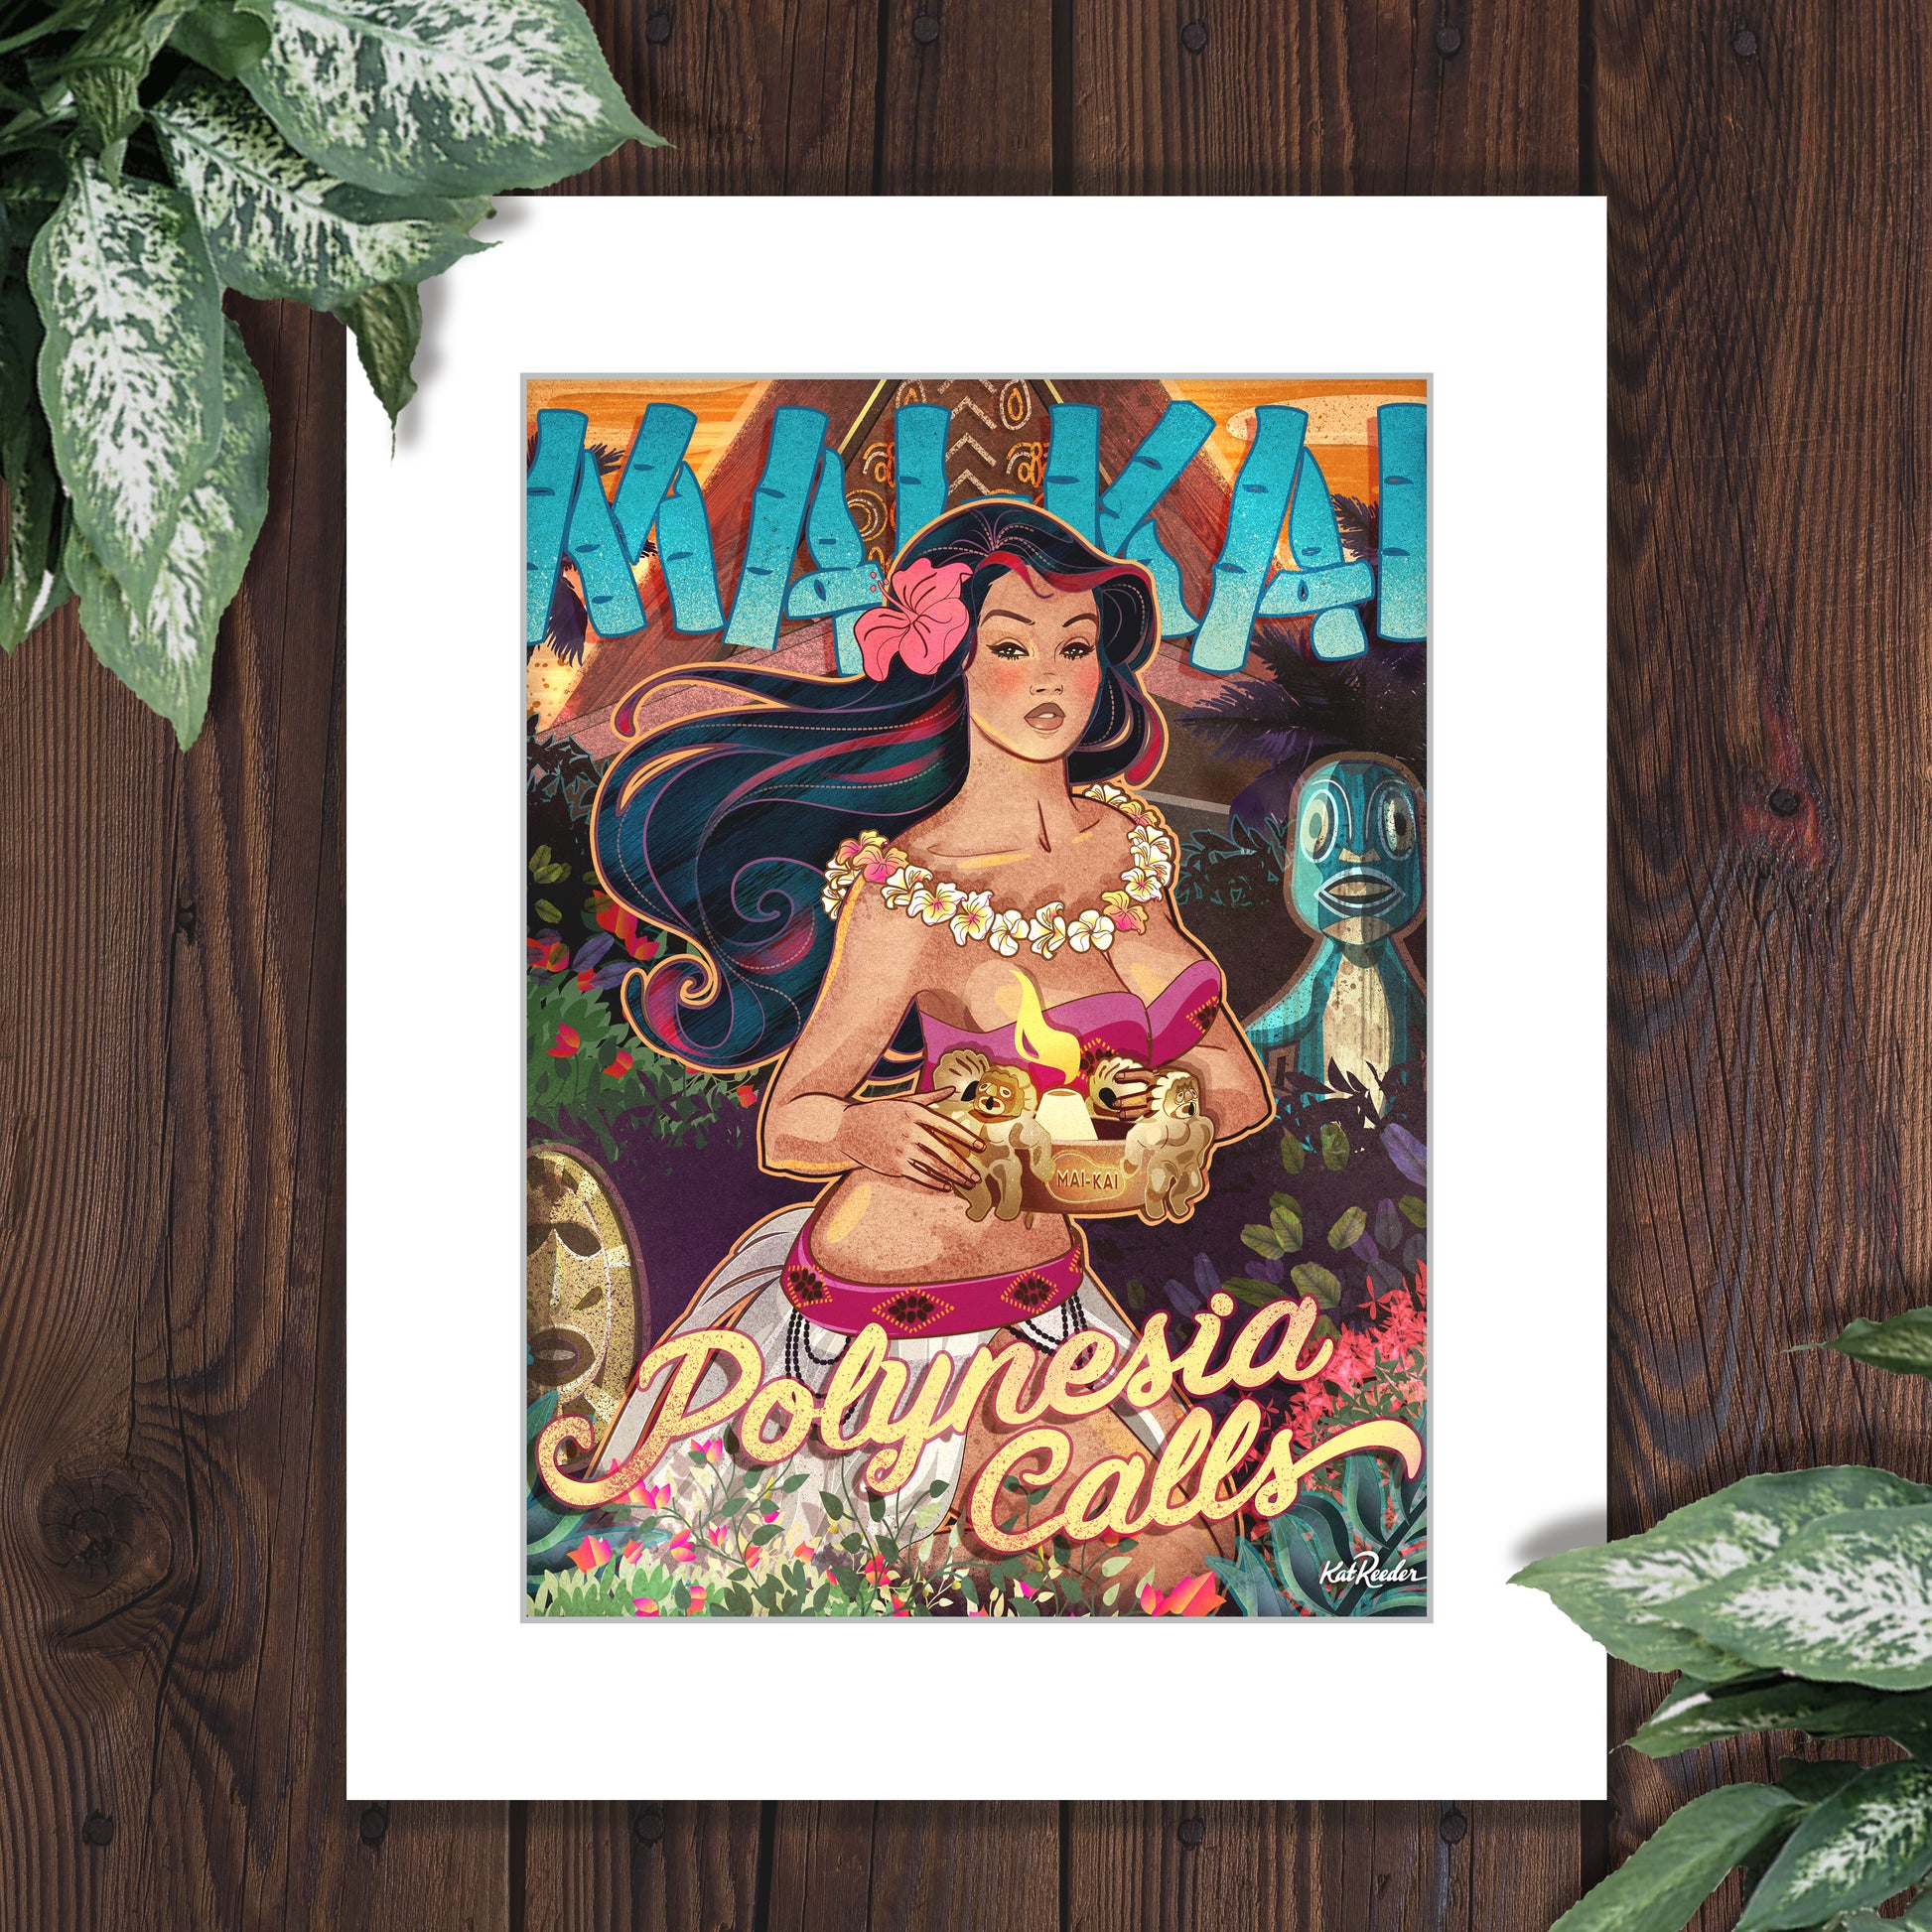 illustration for Mai Kai Restaurant Fort Lauderdale featuring their Mystery Girl tiki pin up, holding the mystery cocktail, surrounded by tikis and lush foliage. The restaurant roof is seen in the backdrop as well as the text that reads "Mai Kai: Polynesia Calls"